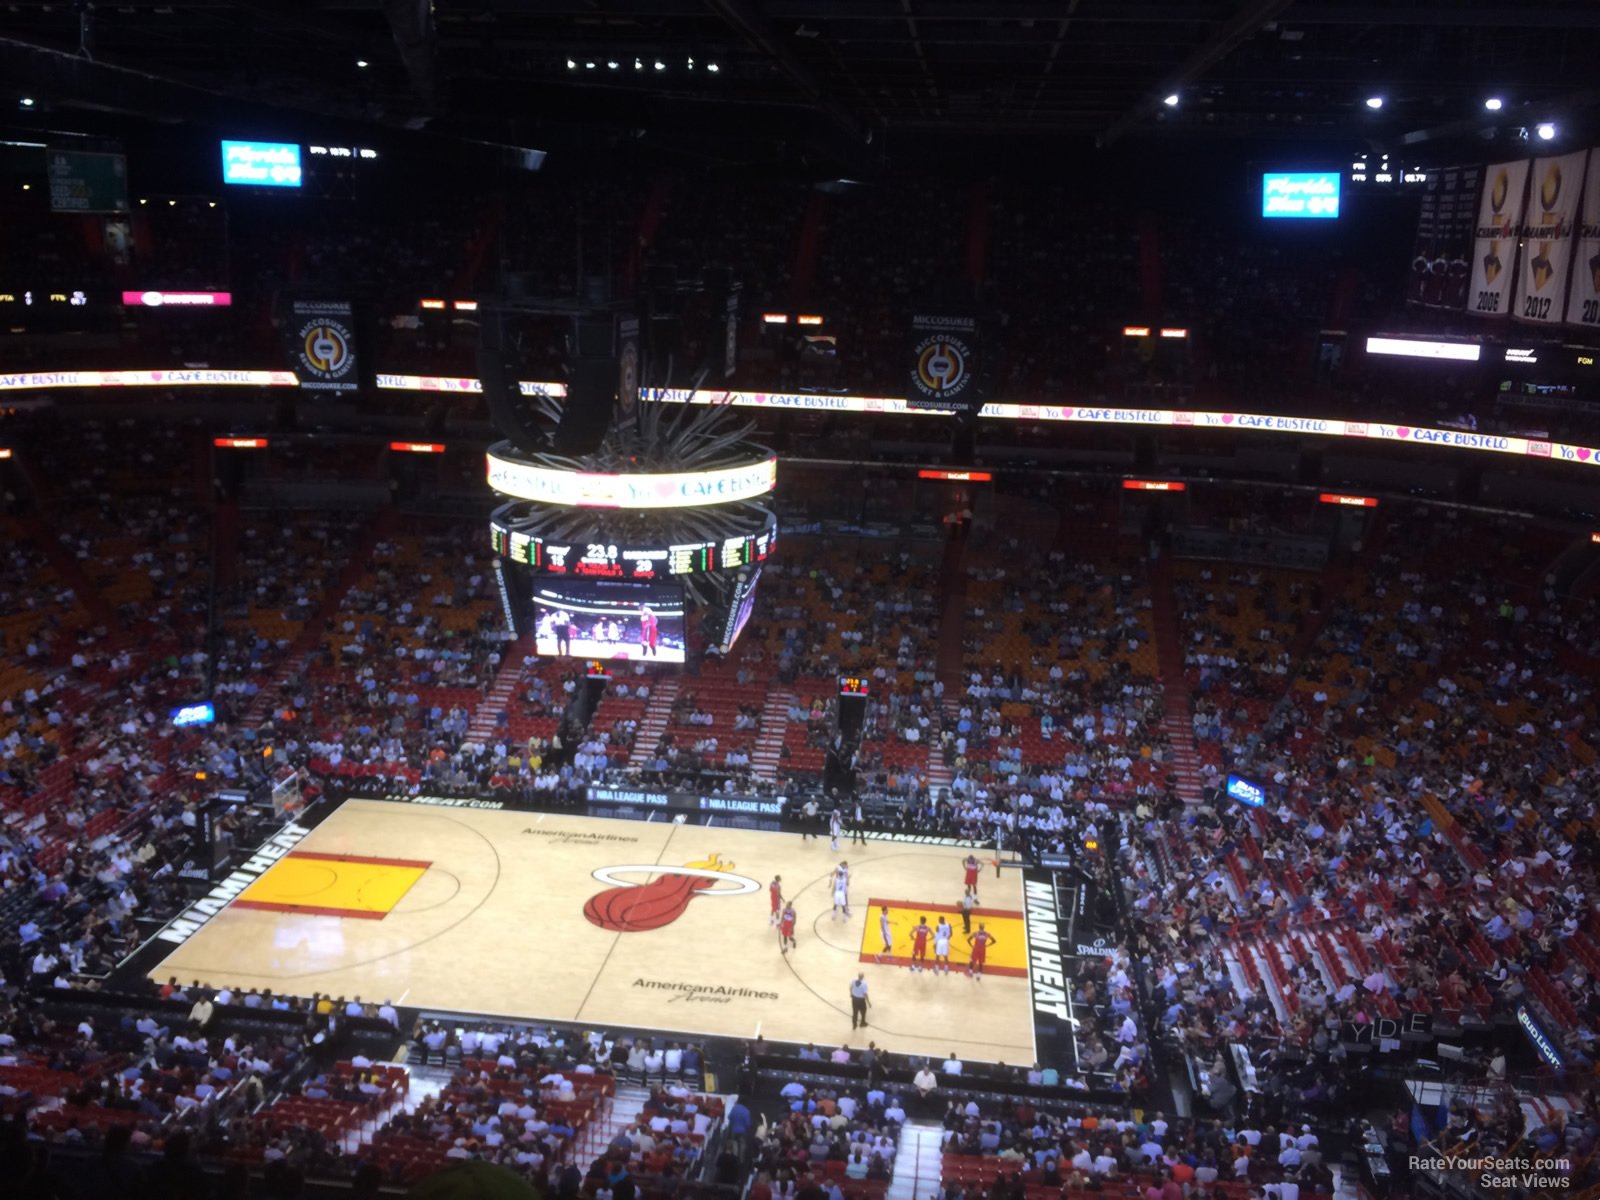 300 Level Center - AmericanAirlines Arena Basketball Seating - RateYourSeats.com1600 x 1200